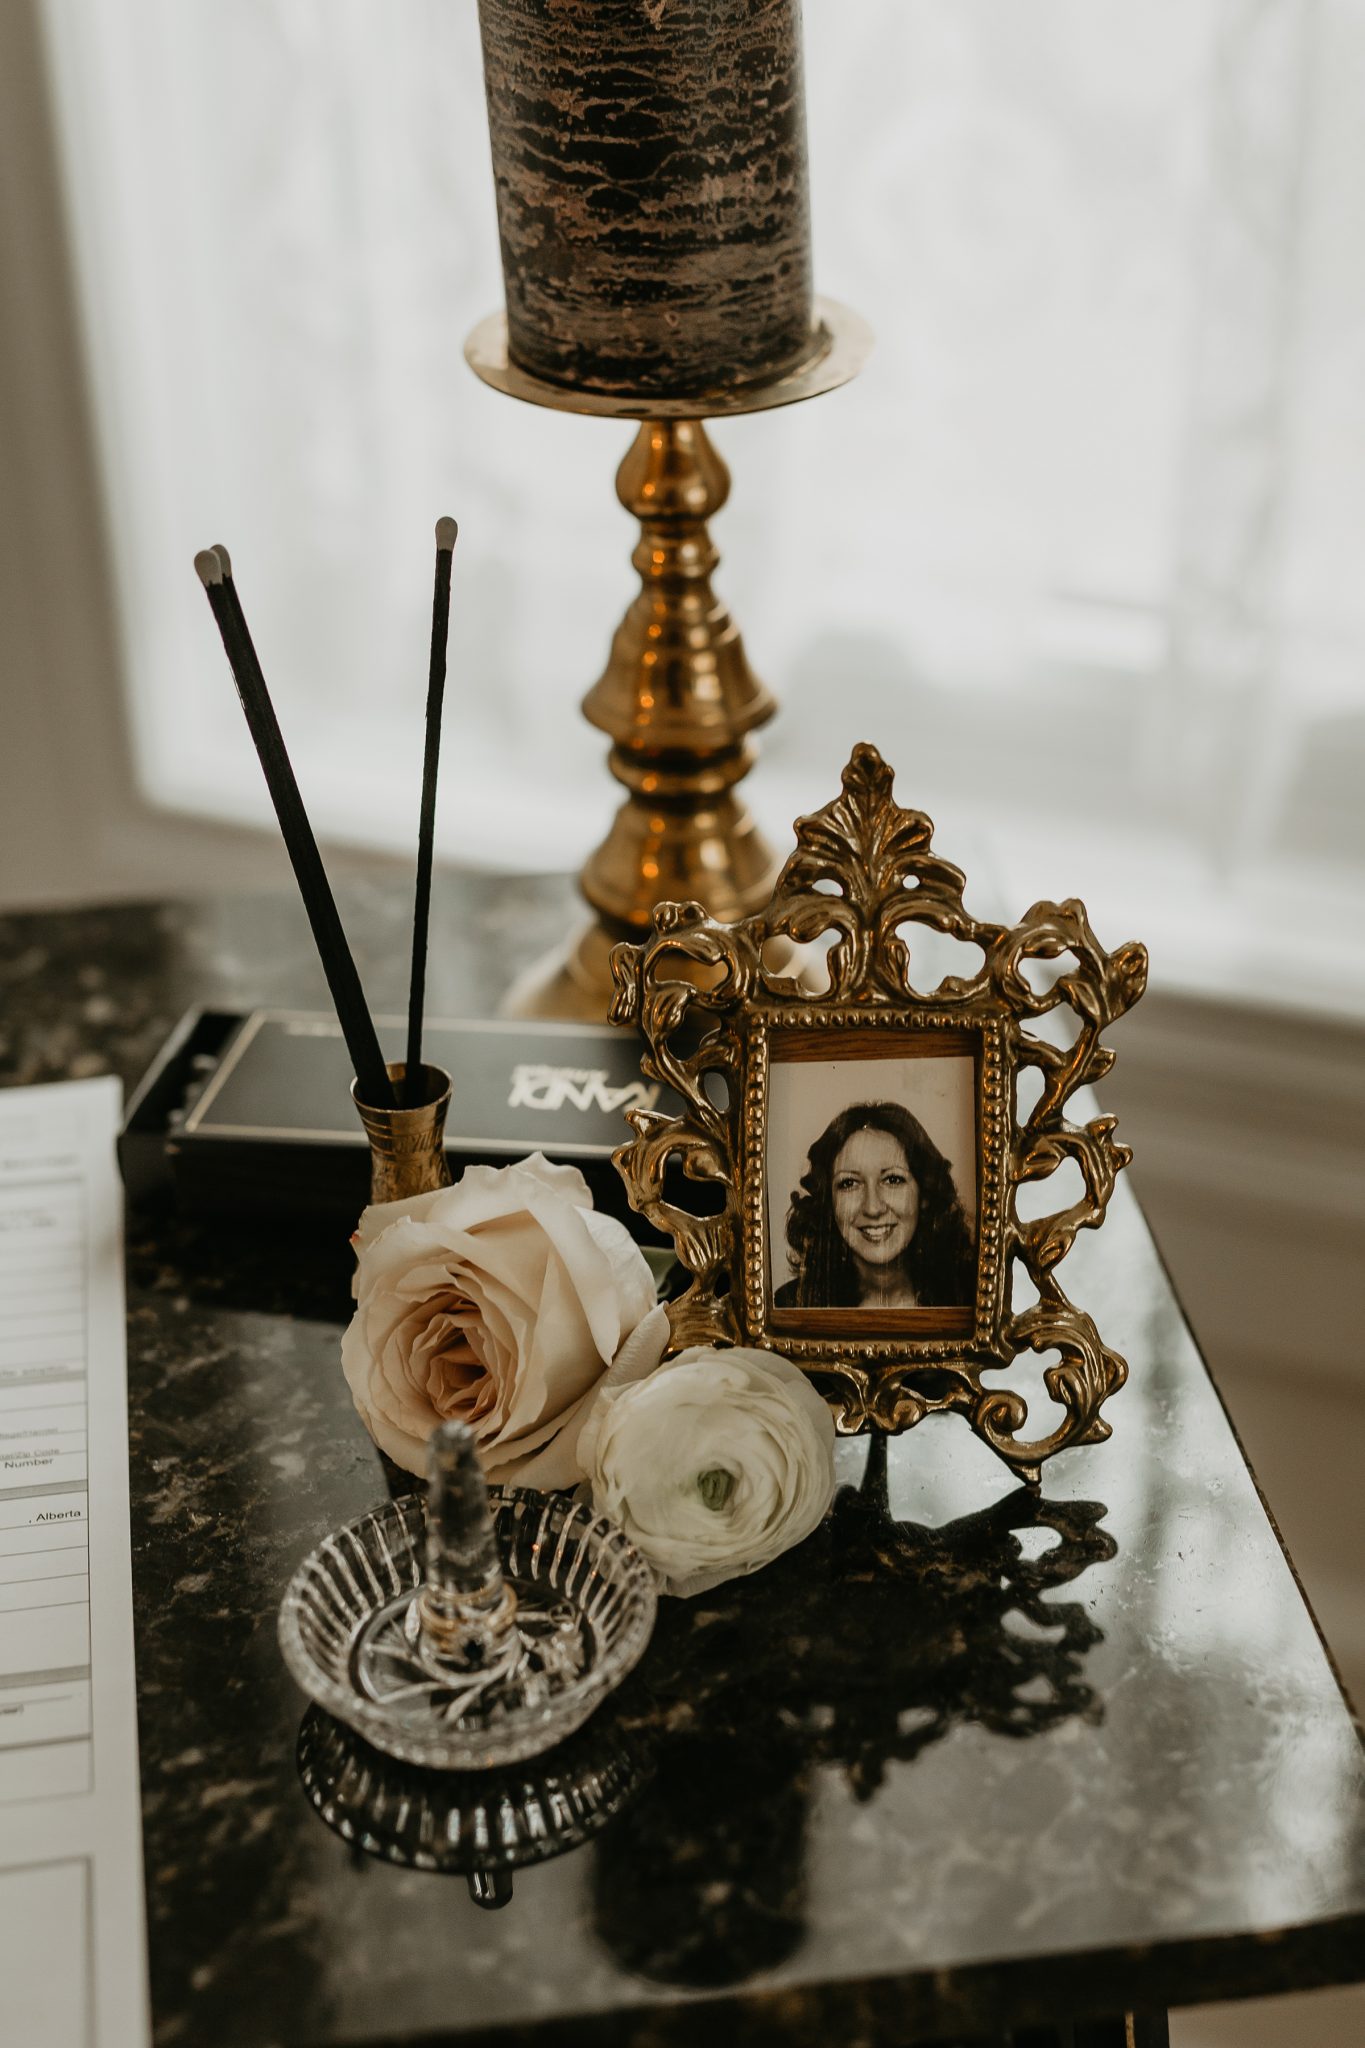 Framed photograph of a woman on a side table with roses